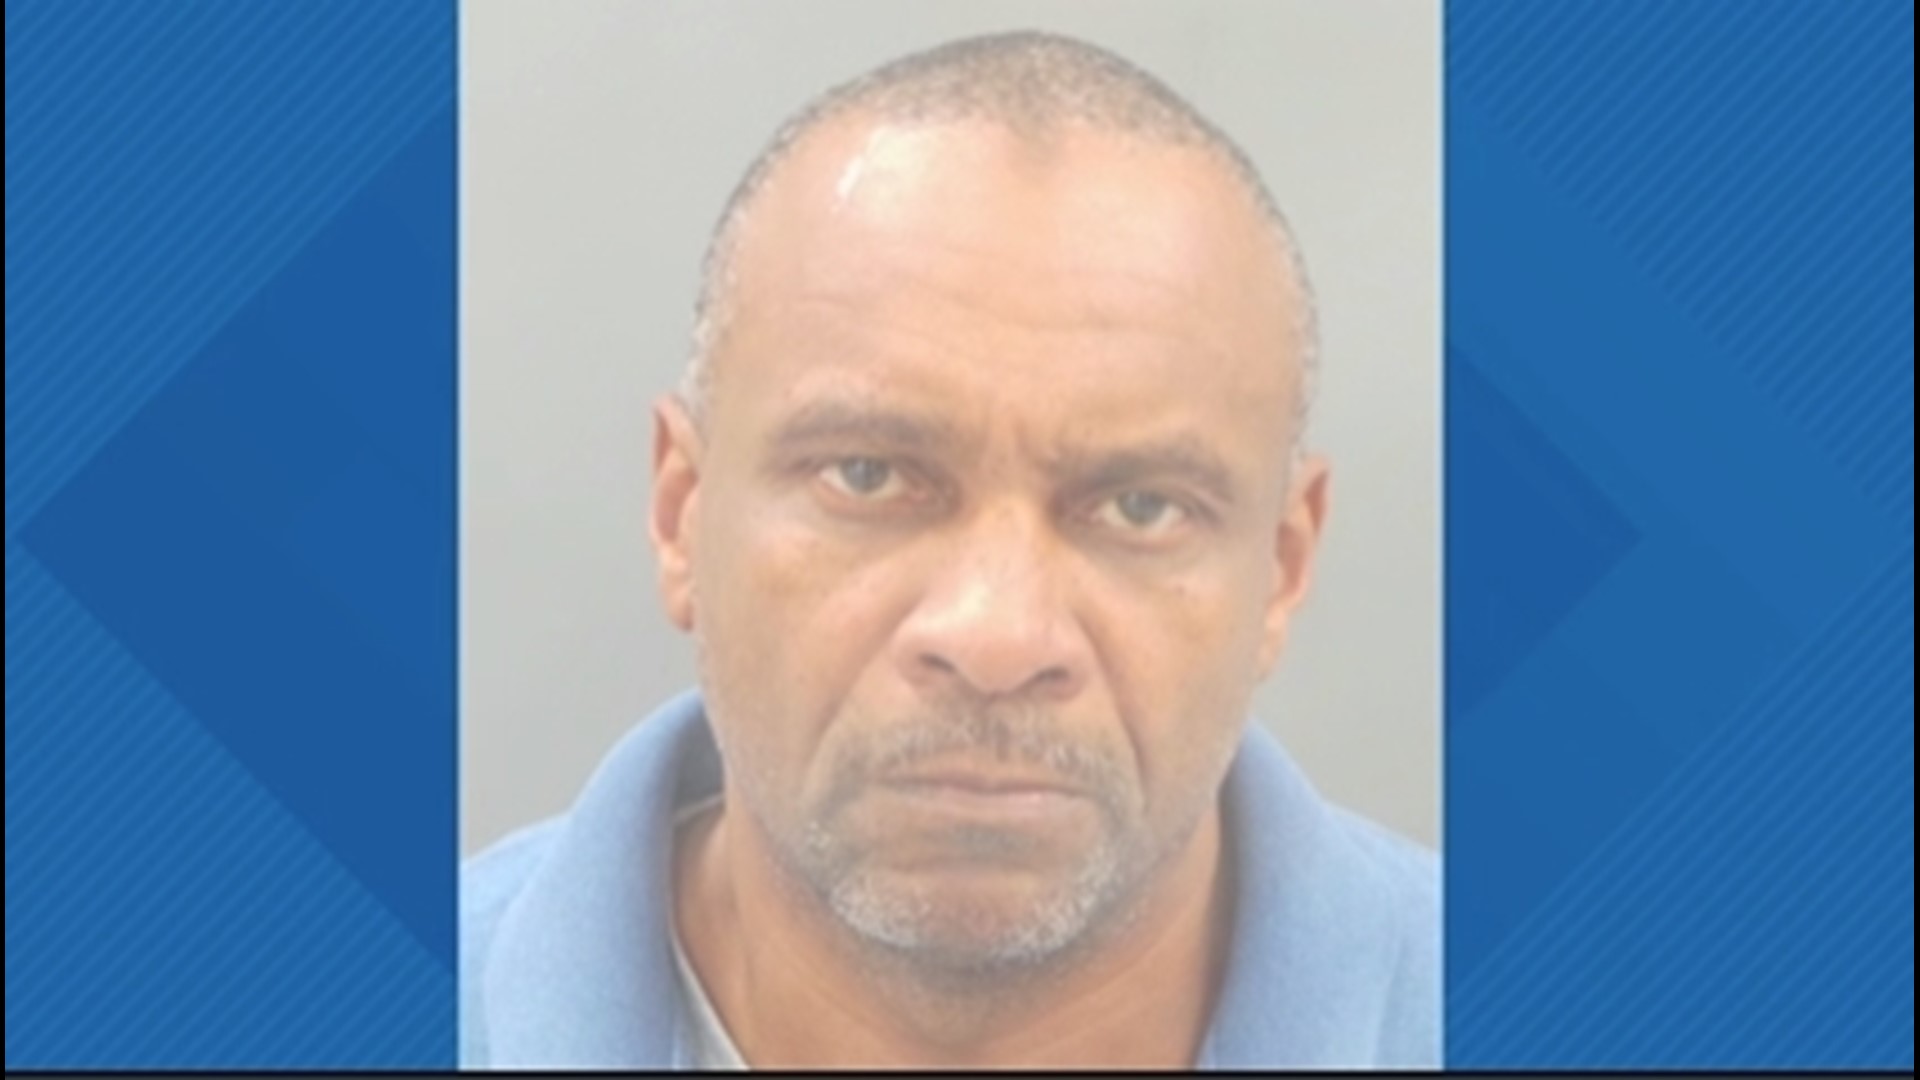 Larry Ward was sentenced to prison Tuesday for sexually assaulting a rideshare customer in 2019. He was sentenced to 13 years in prison.